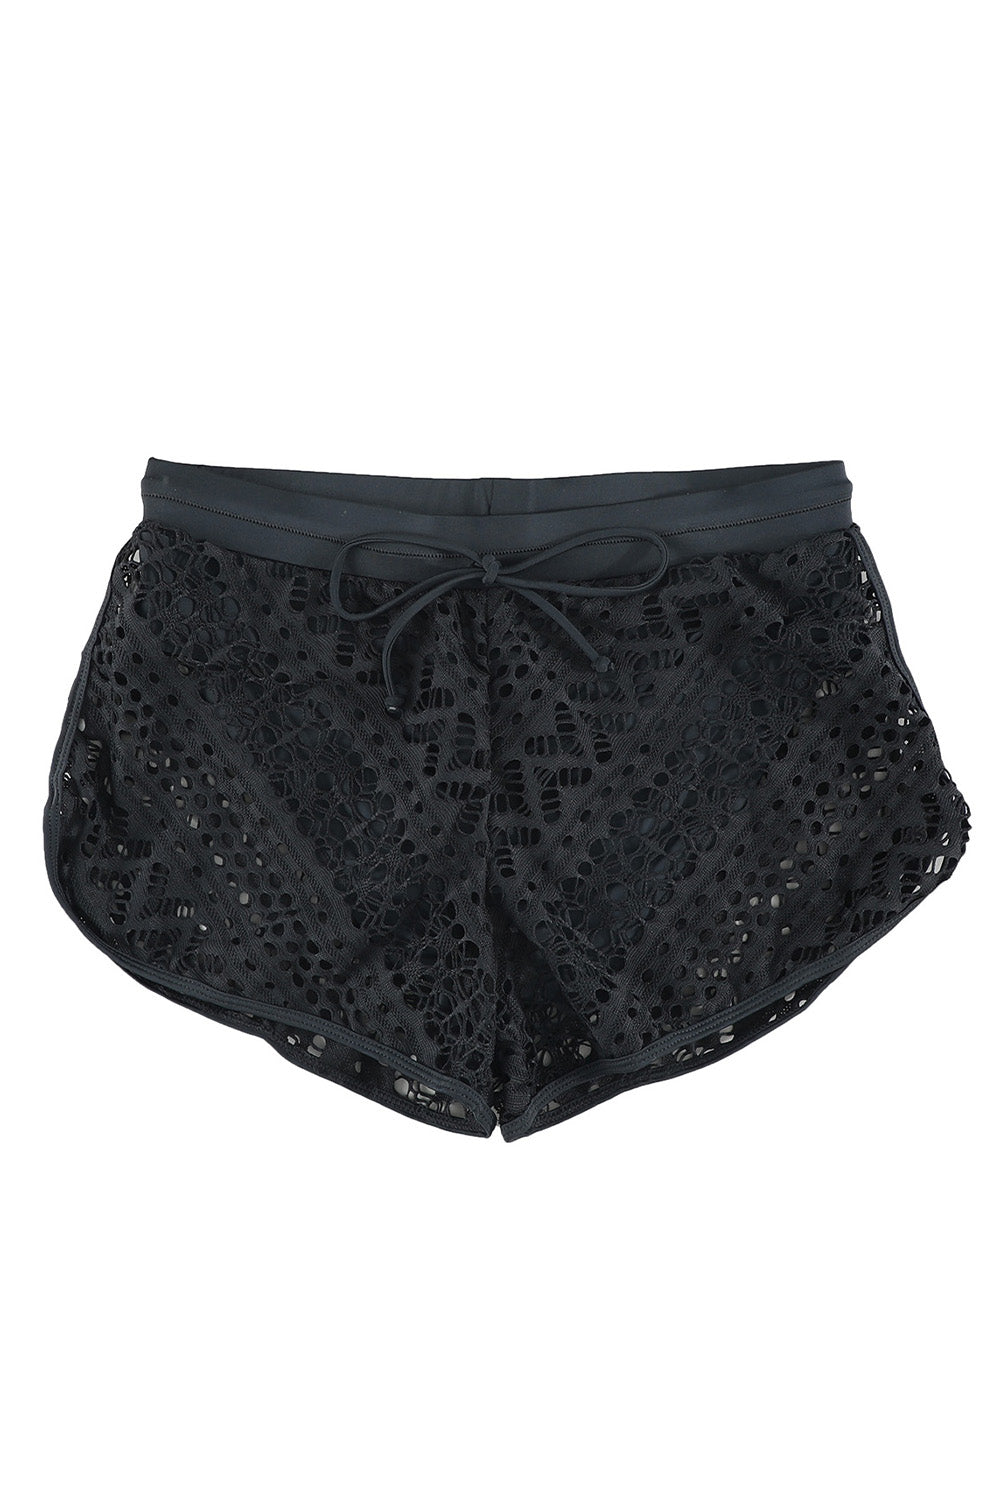 Black Hollow Out Lace Overlay Swim Short Bottom